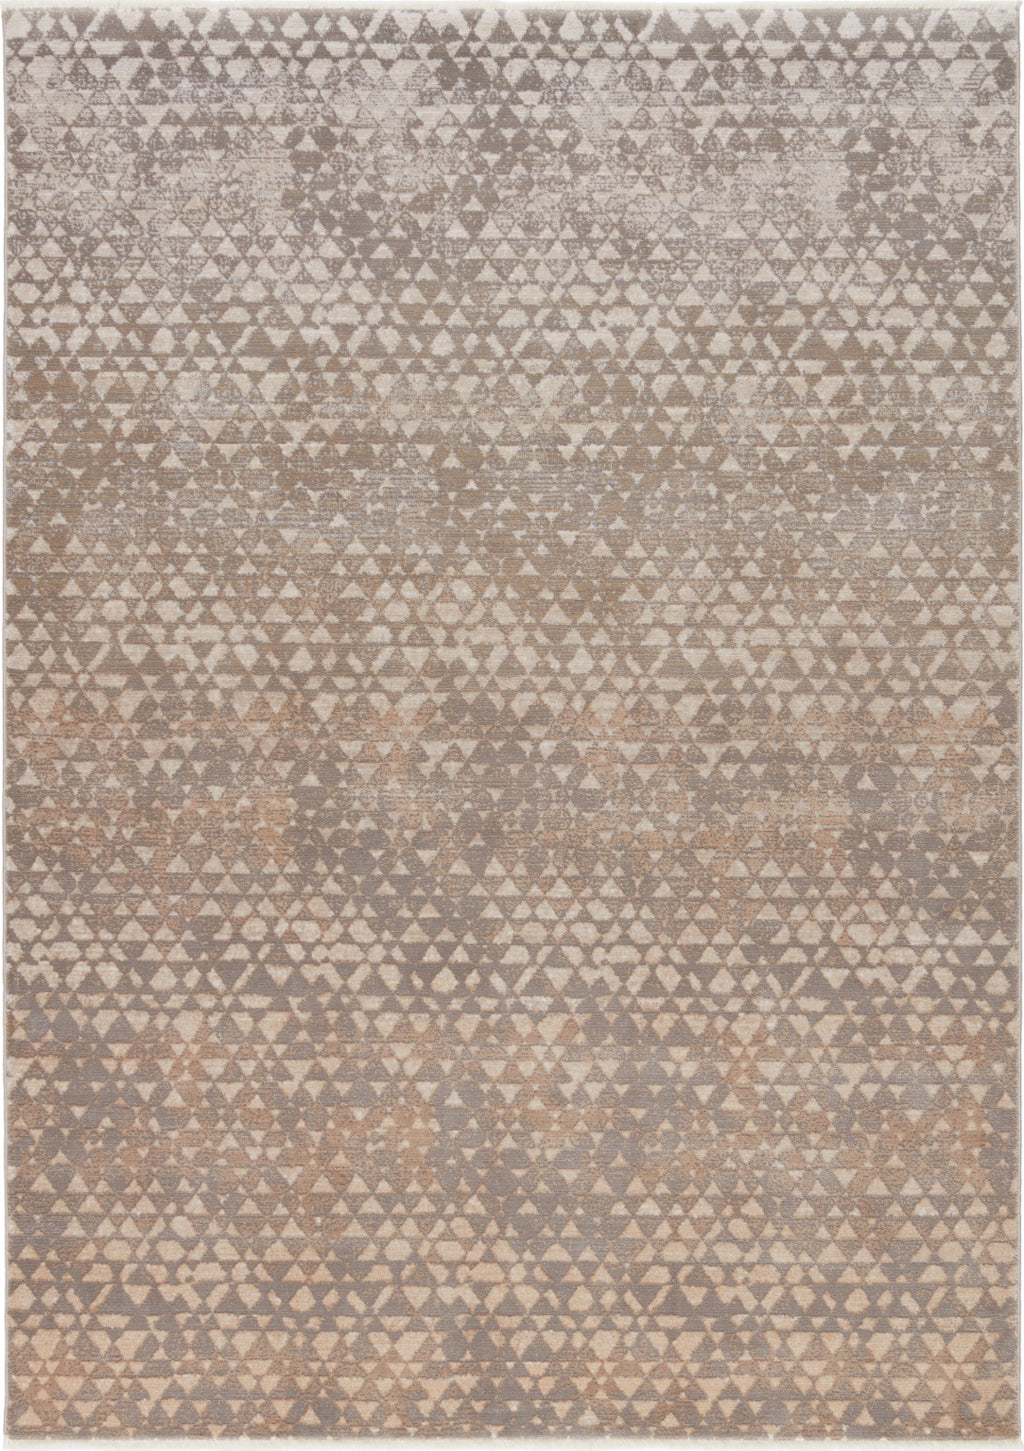 Jaipur Living Land Sea Sky Sierra Taupe/Gray Area Rug by Kevin O'Brien - Top Down